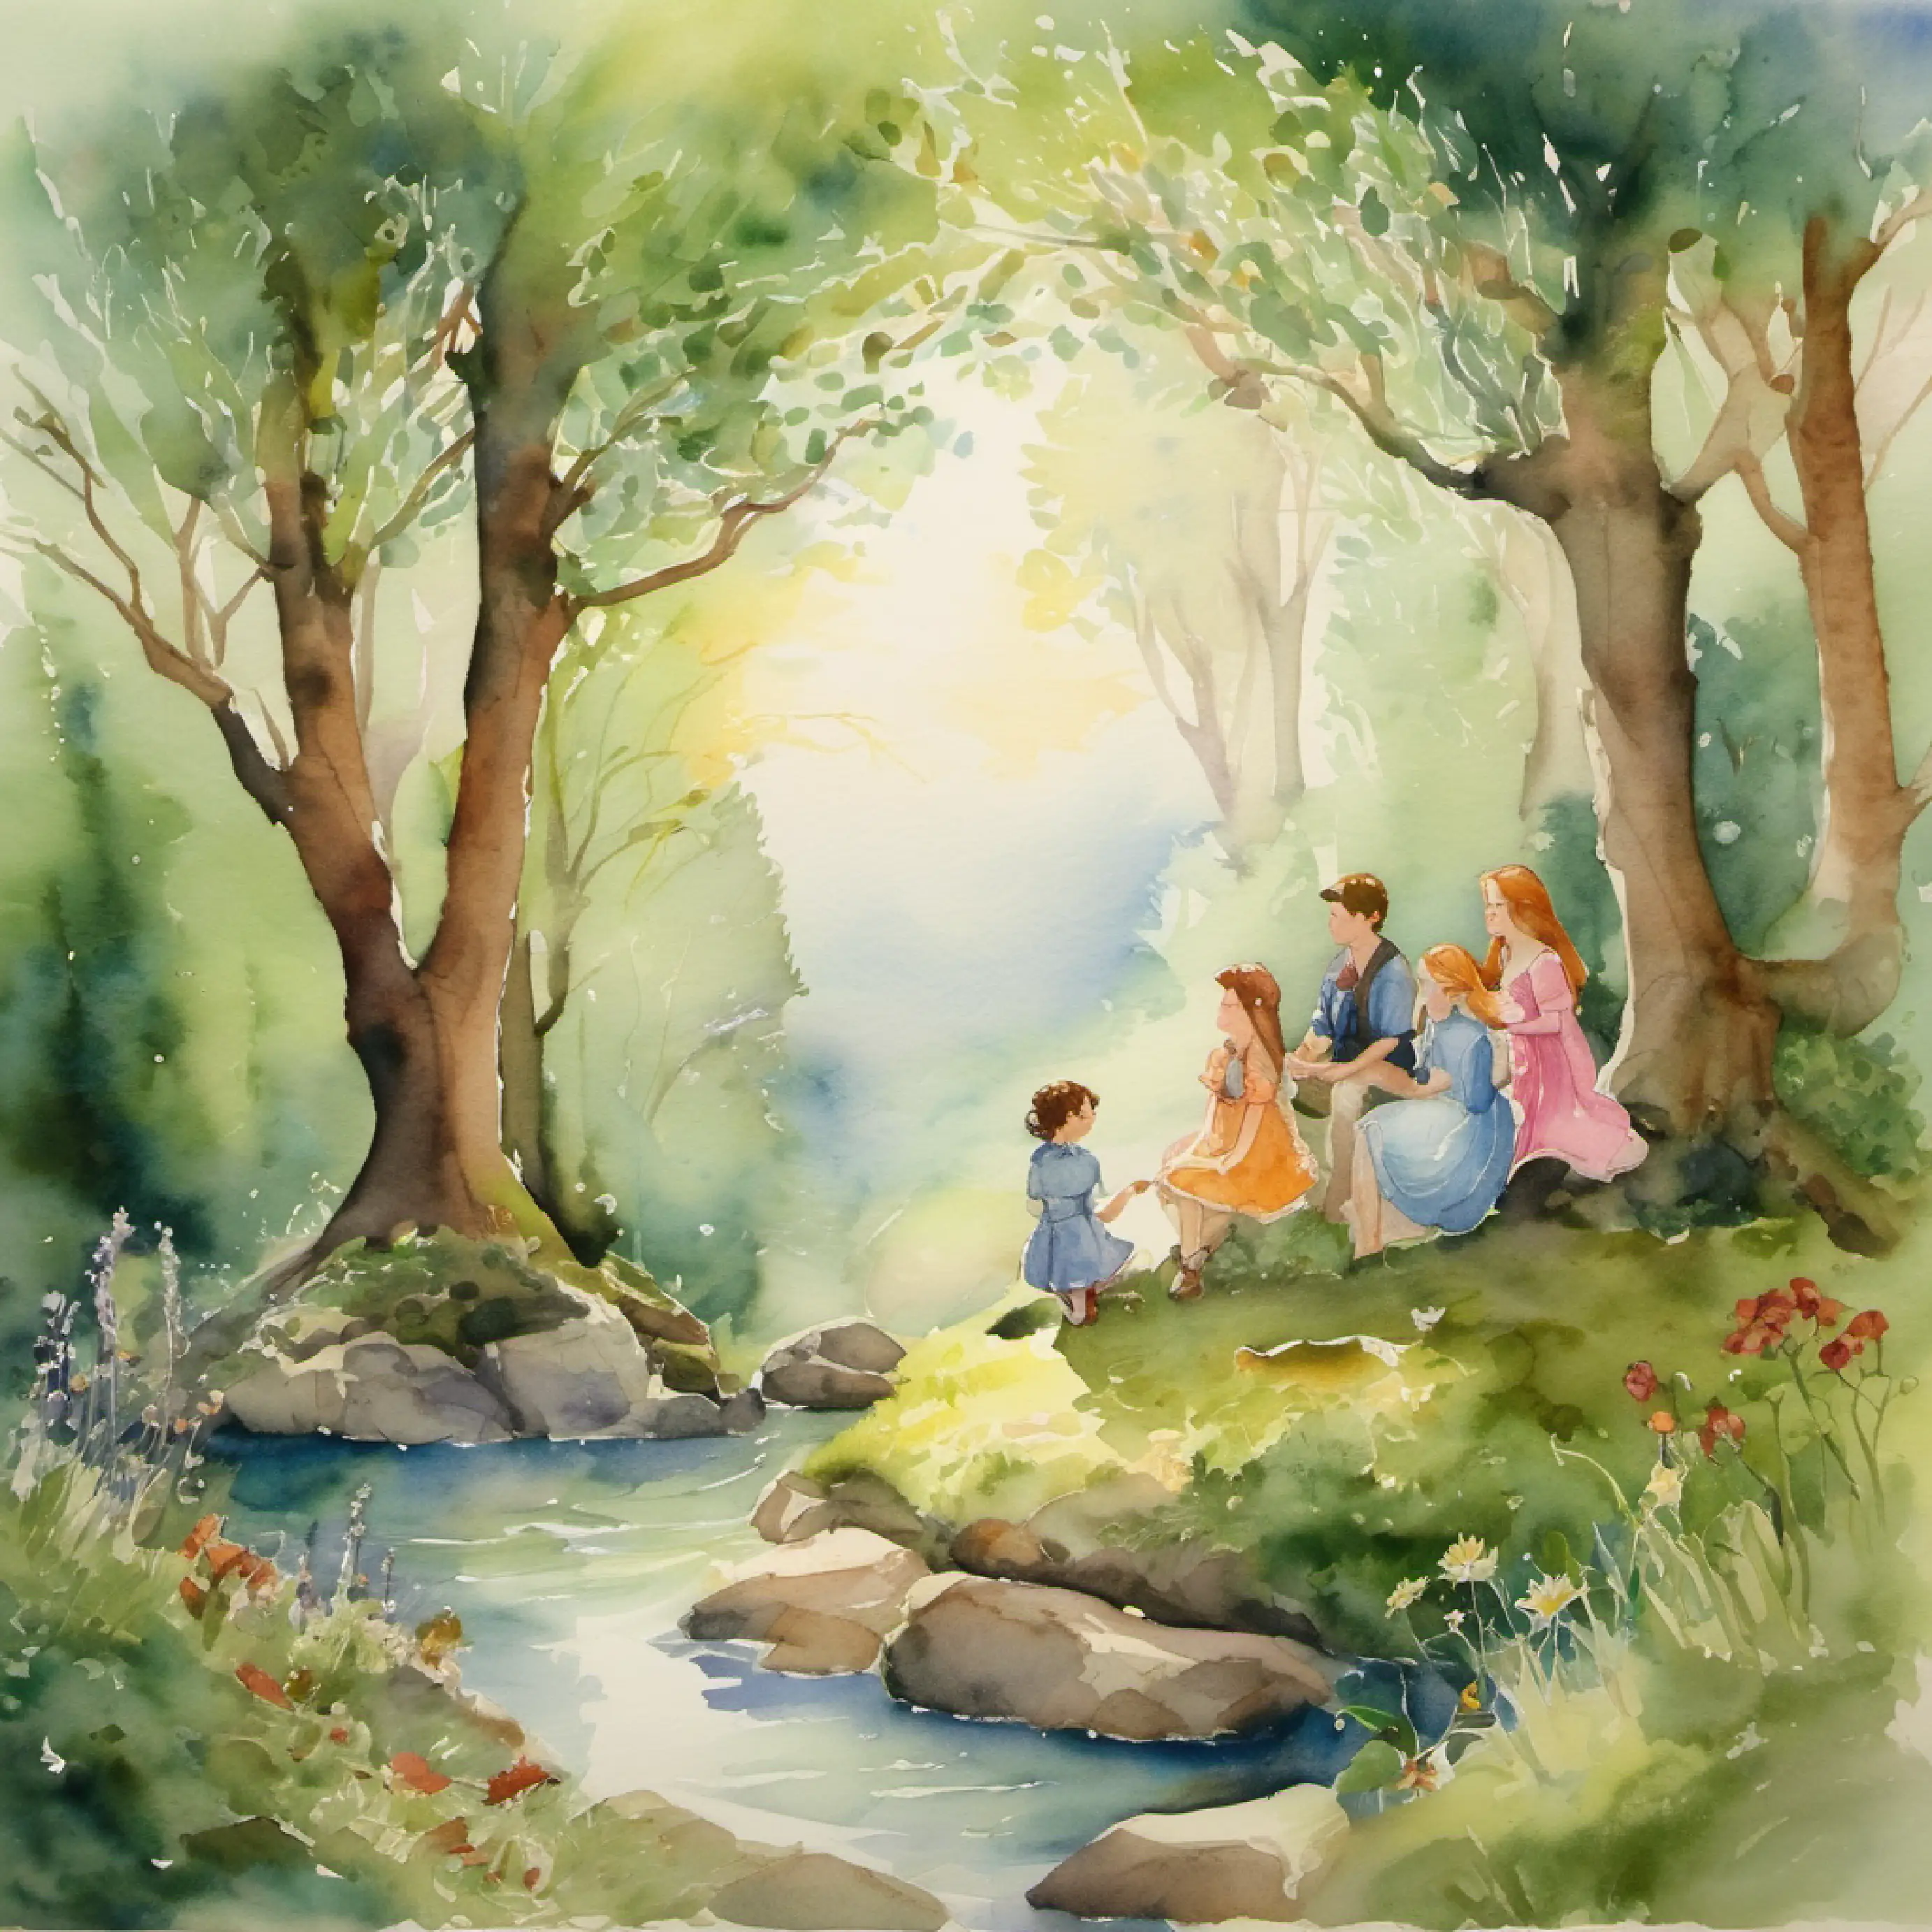 Introduction of the three friends and the fairy wood.